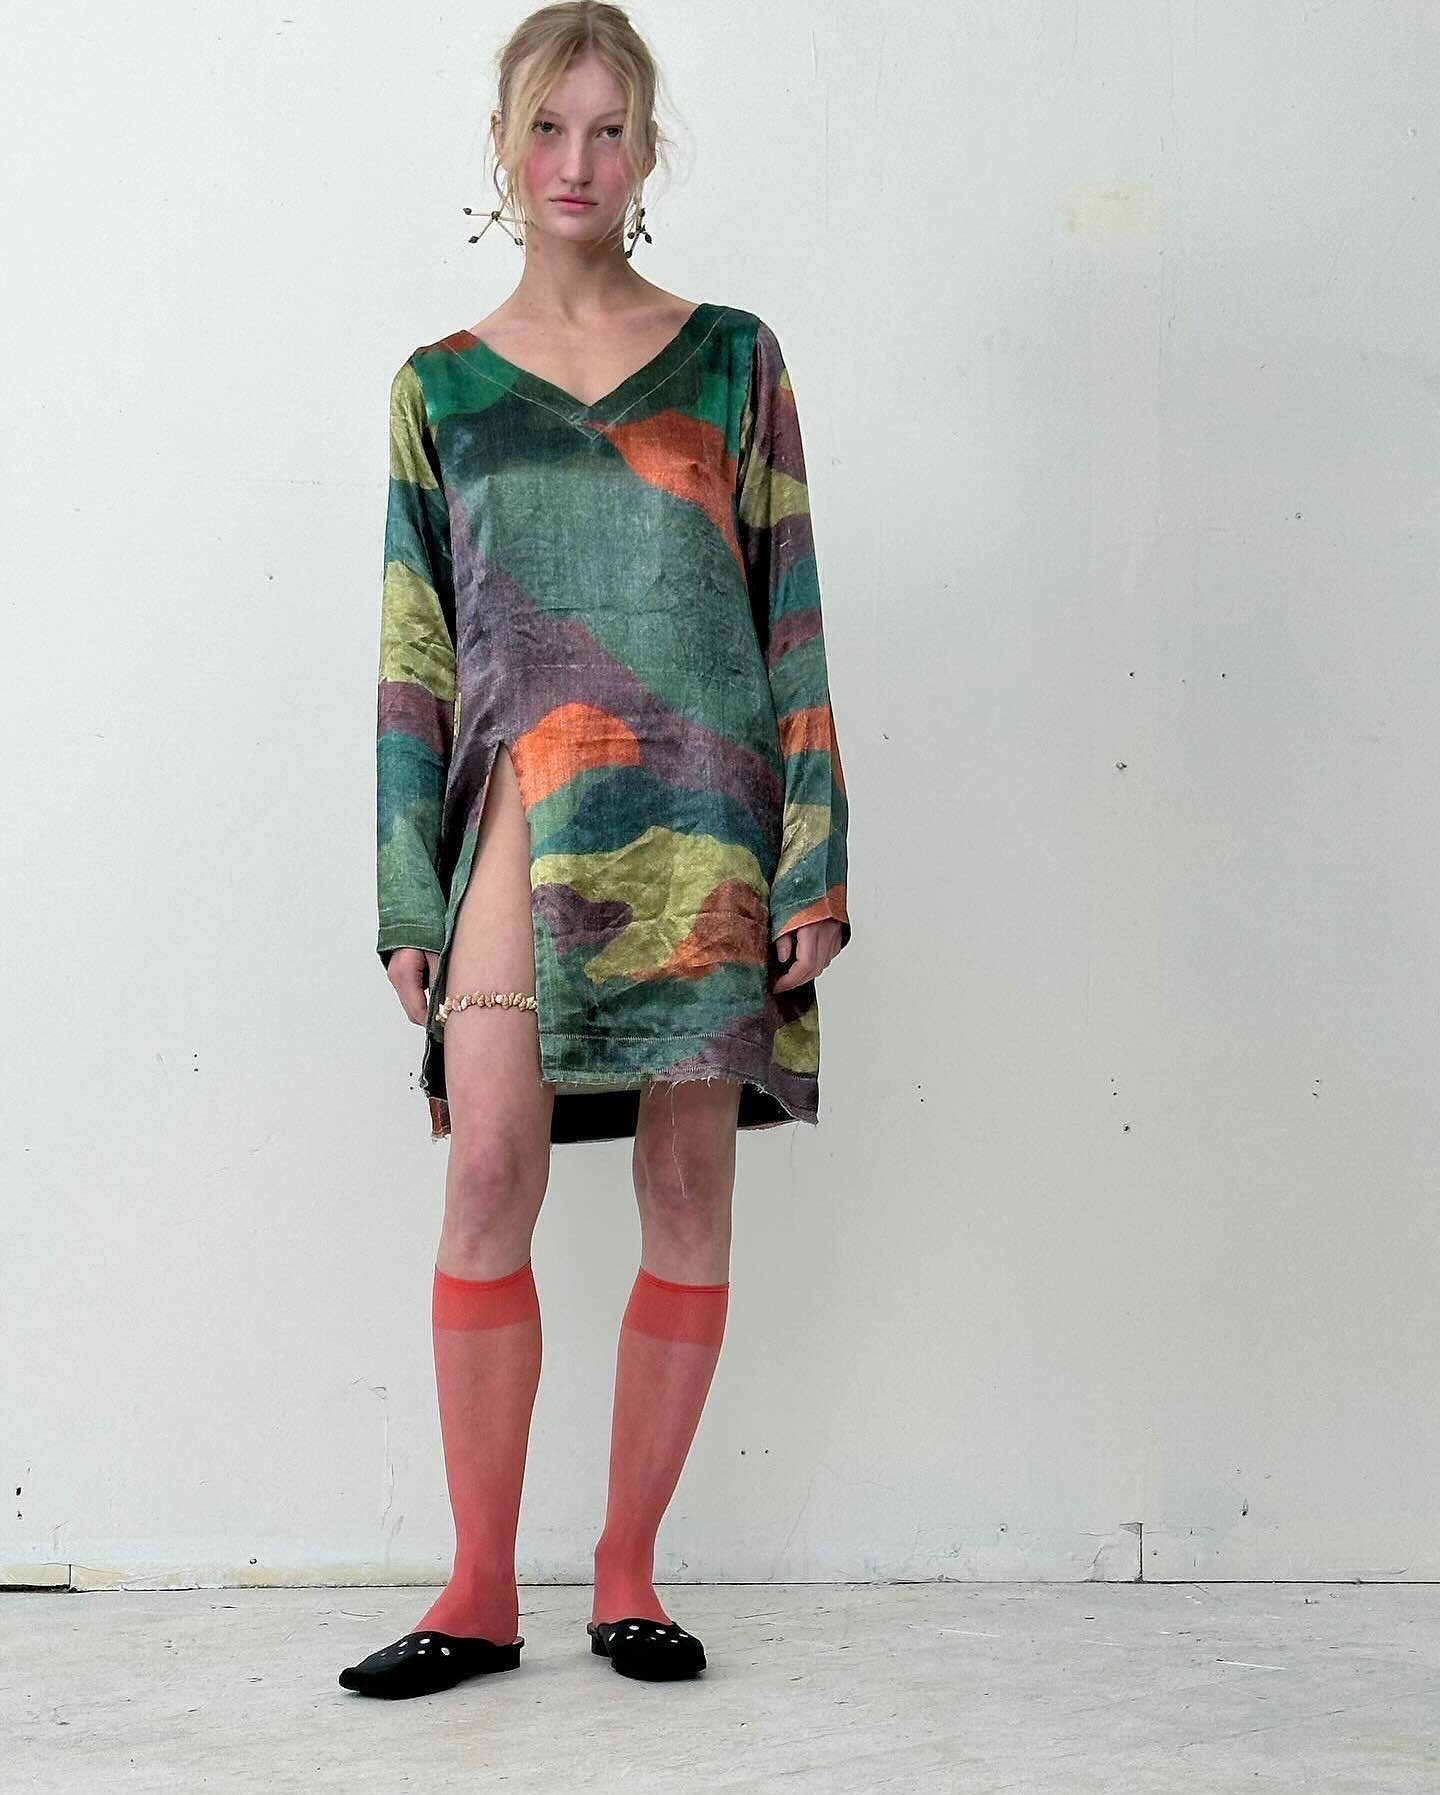 Pauline in studio in hand-printed camo mashroo mini dress
Now available in our web shop